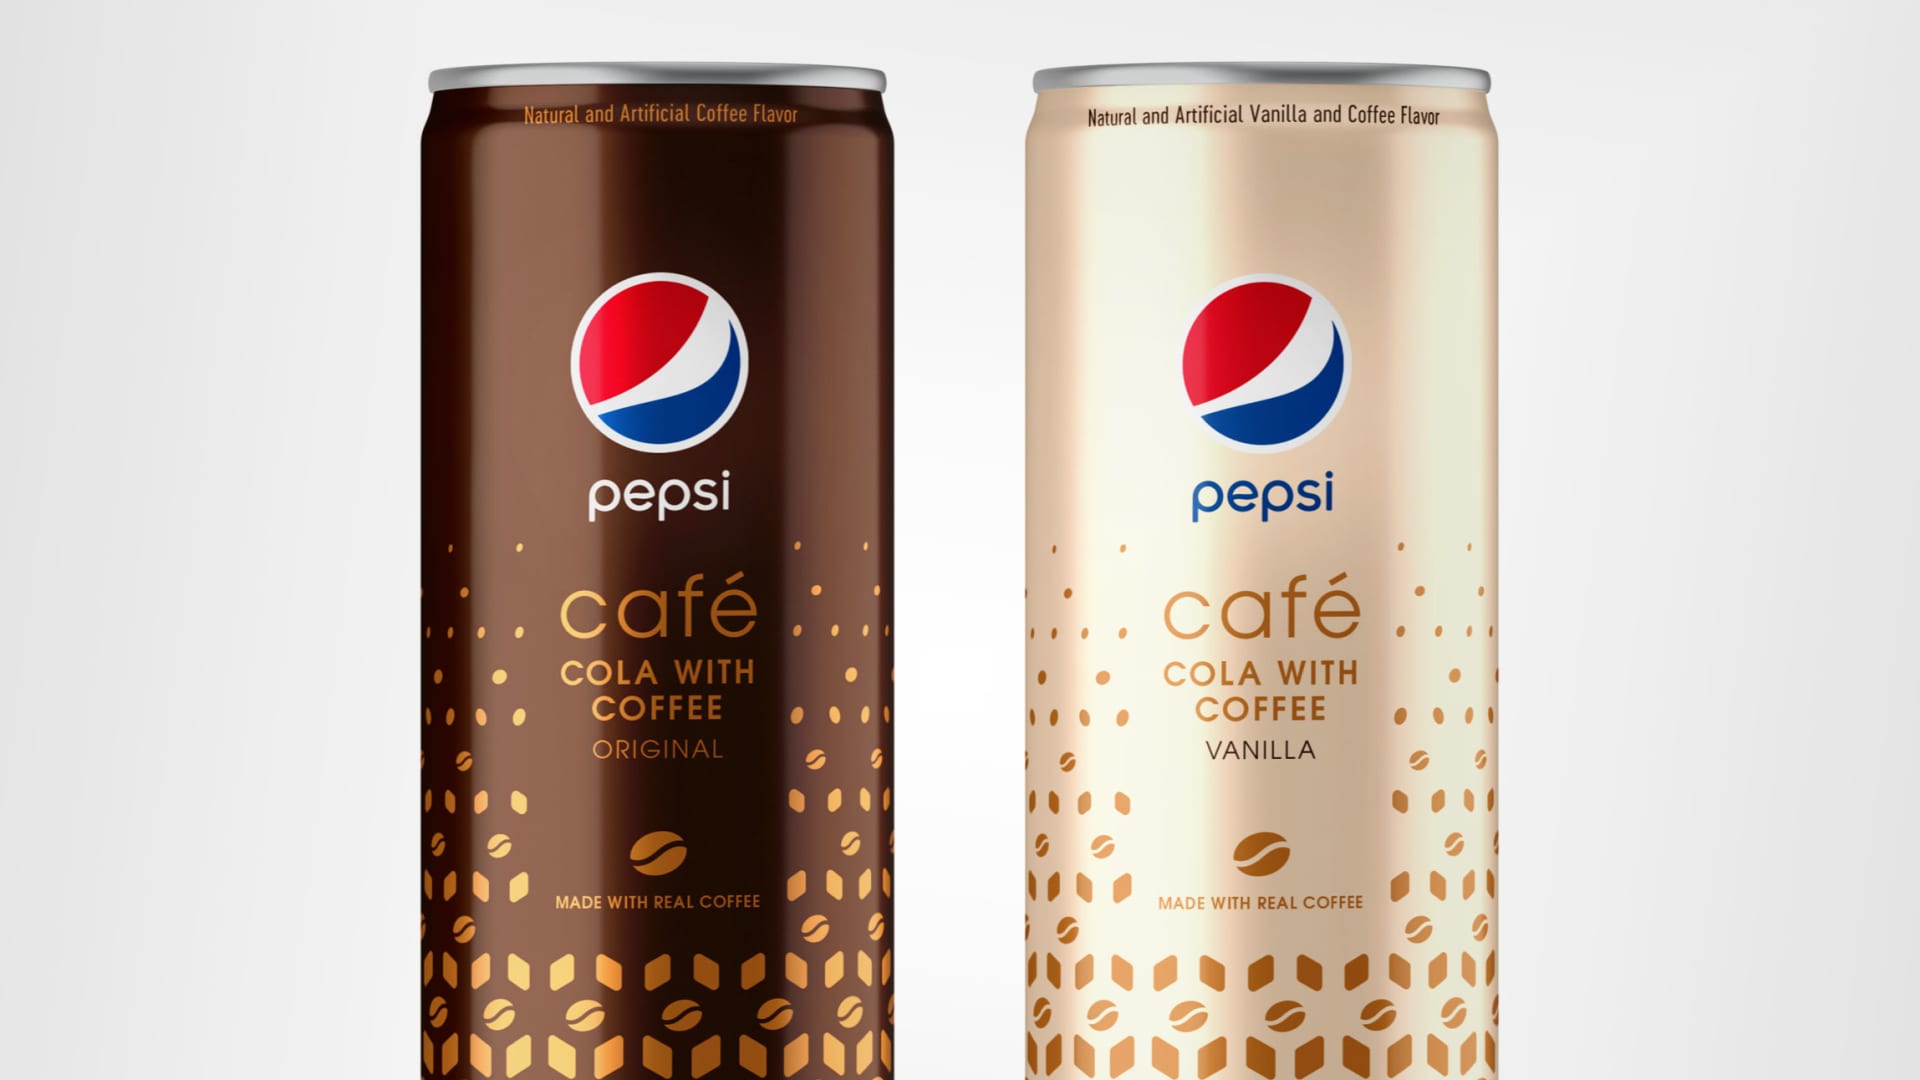 PepsiCo to debut Pepsi Cafe, a coffee-cola drink, next year